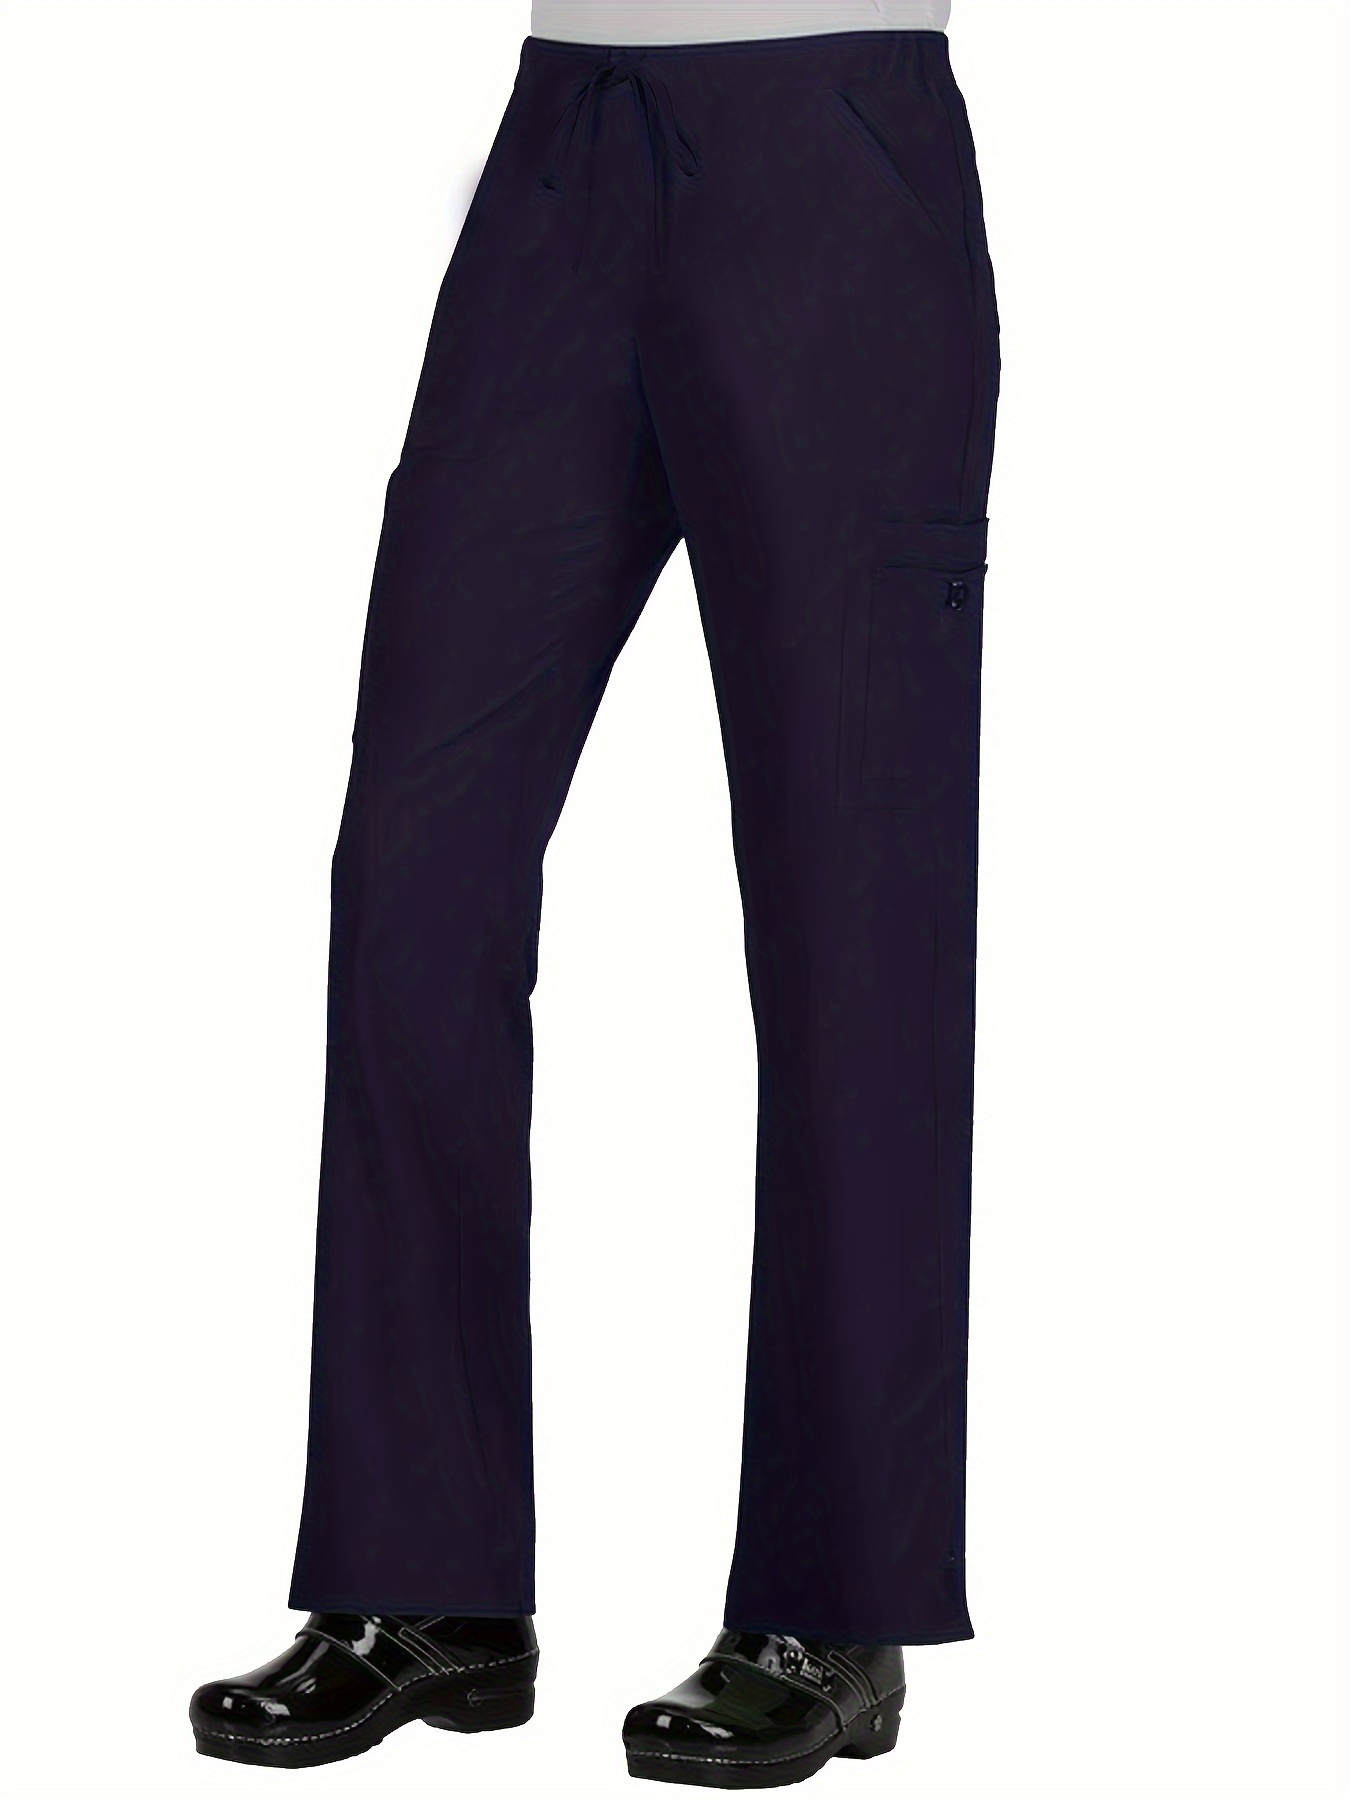 For Tall Women In The Medical Workplace, These Scrub Pants Are